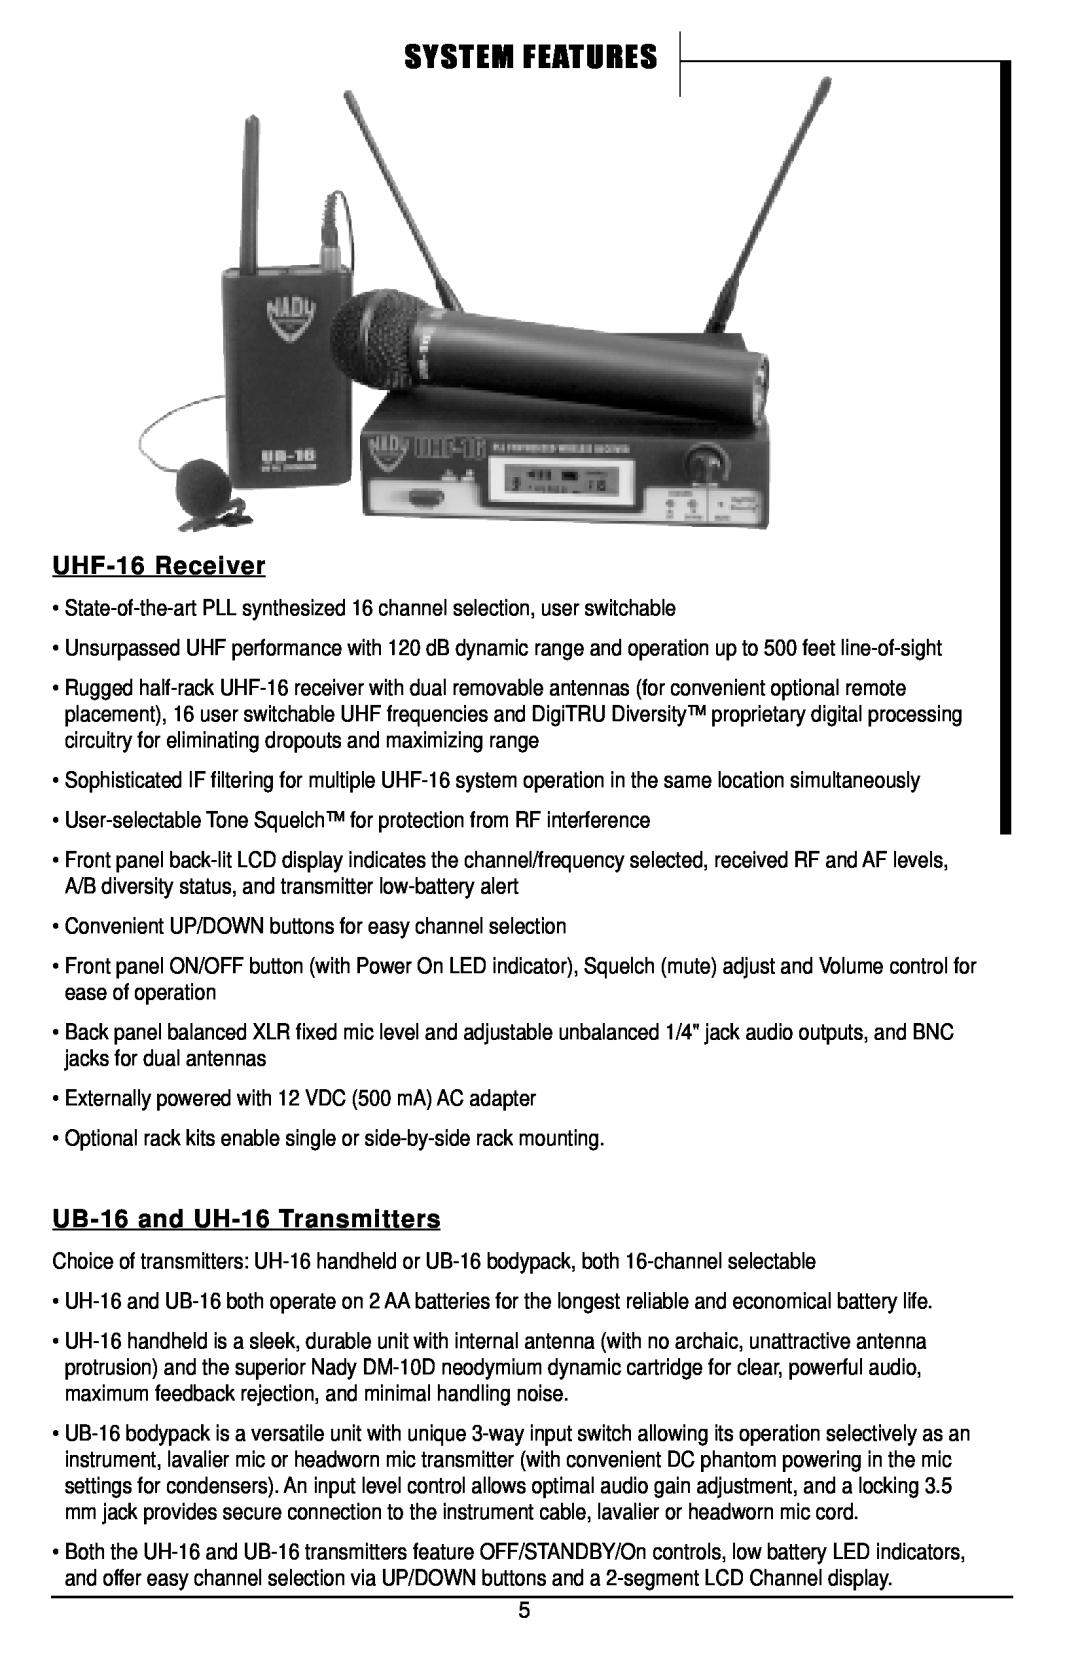 Nady Systems owner manual System Features, UHF-16Receiver, UB-16and UH-16Transmitters 